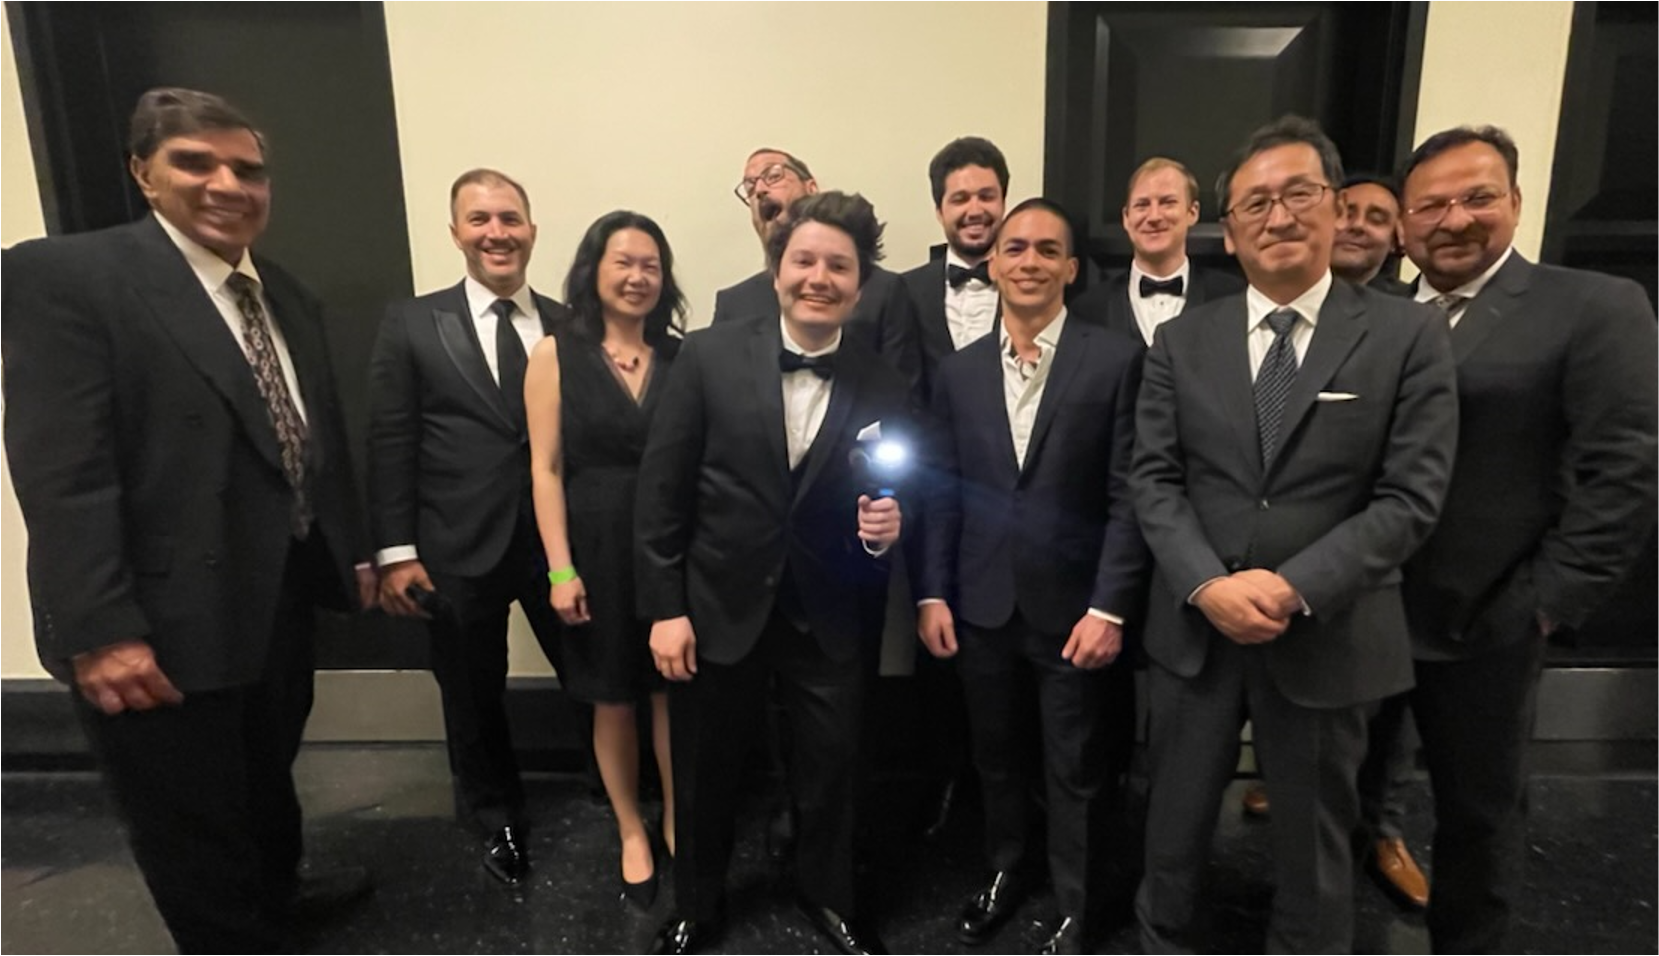 Socionext celebrated the Emmy® Award win with GoPro team members